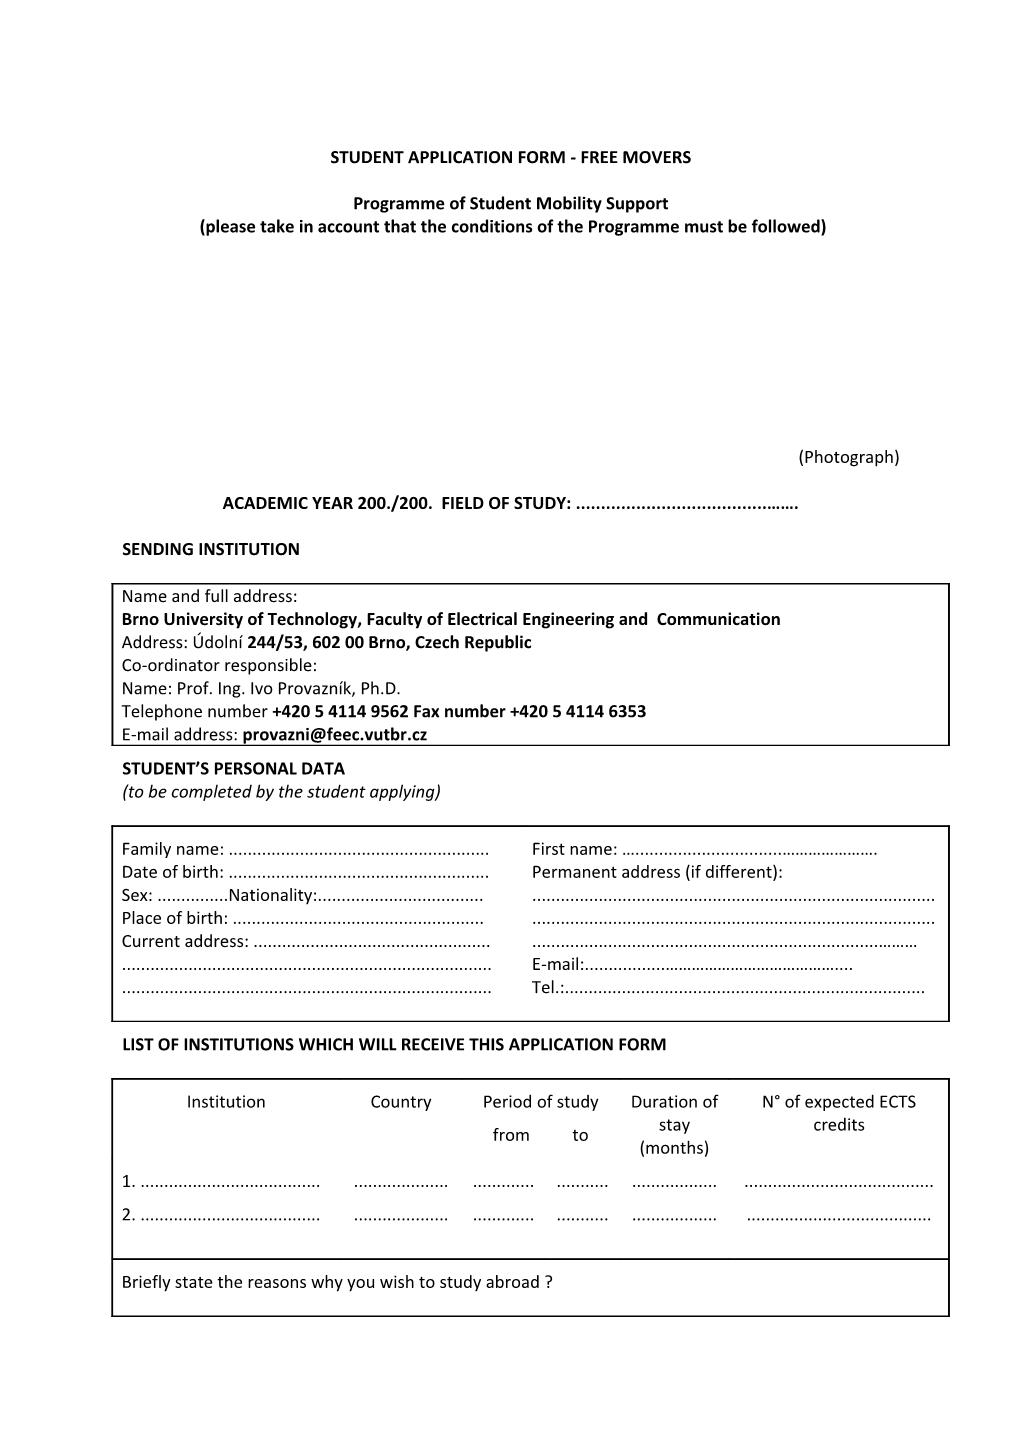 Student Application Form - Free Movers